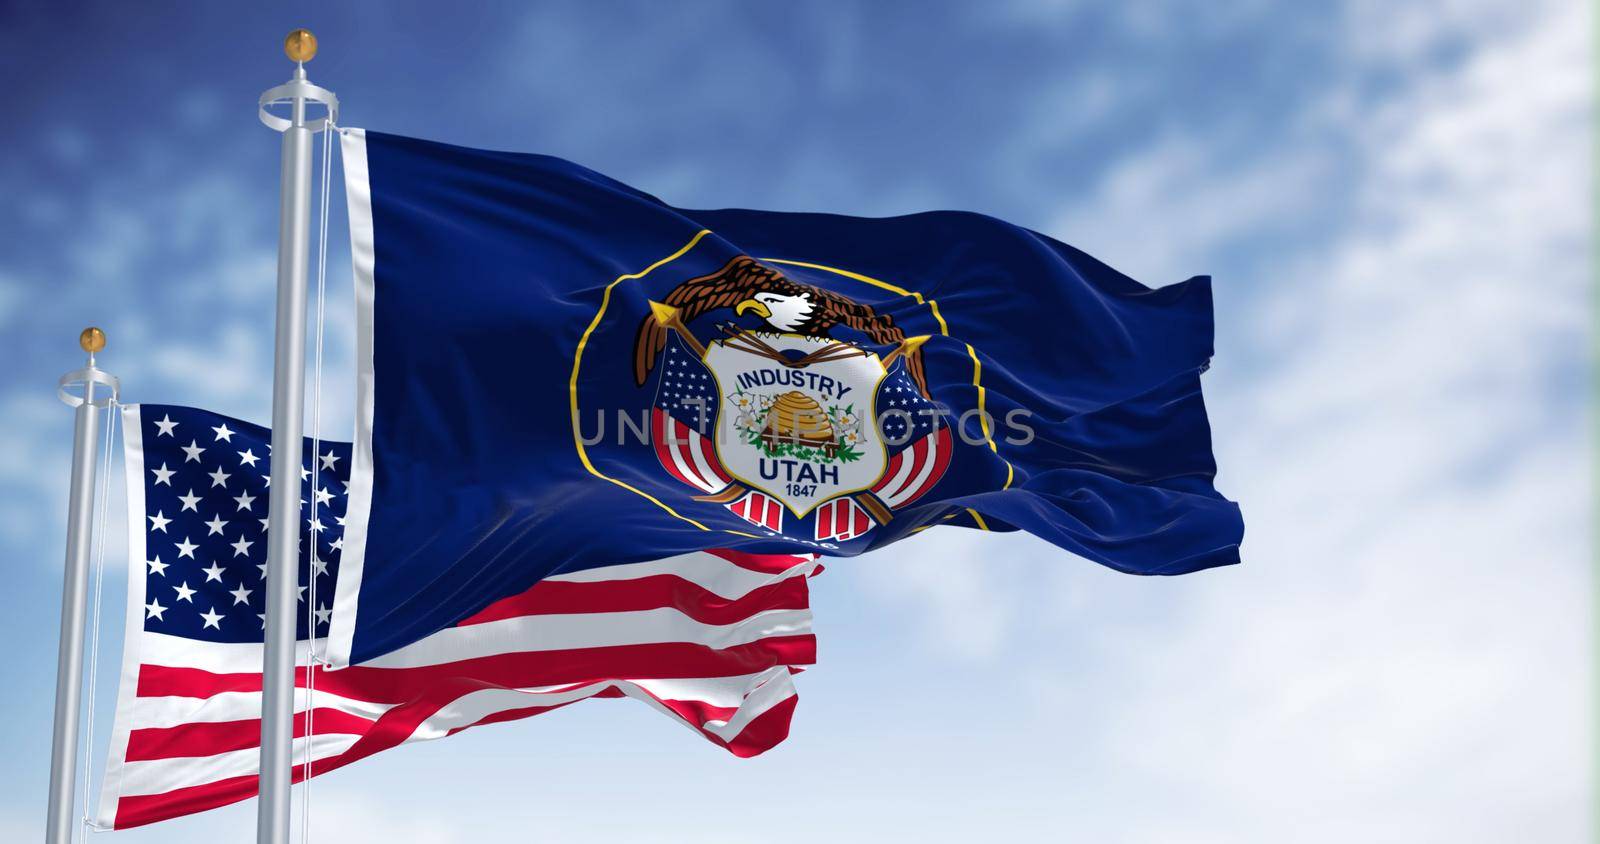 The Utah state flag waving along with the national flag of the United States of America by rarrarorro